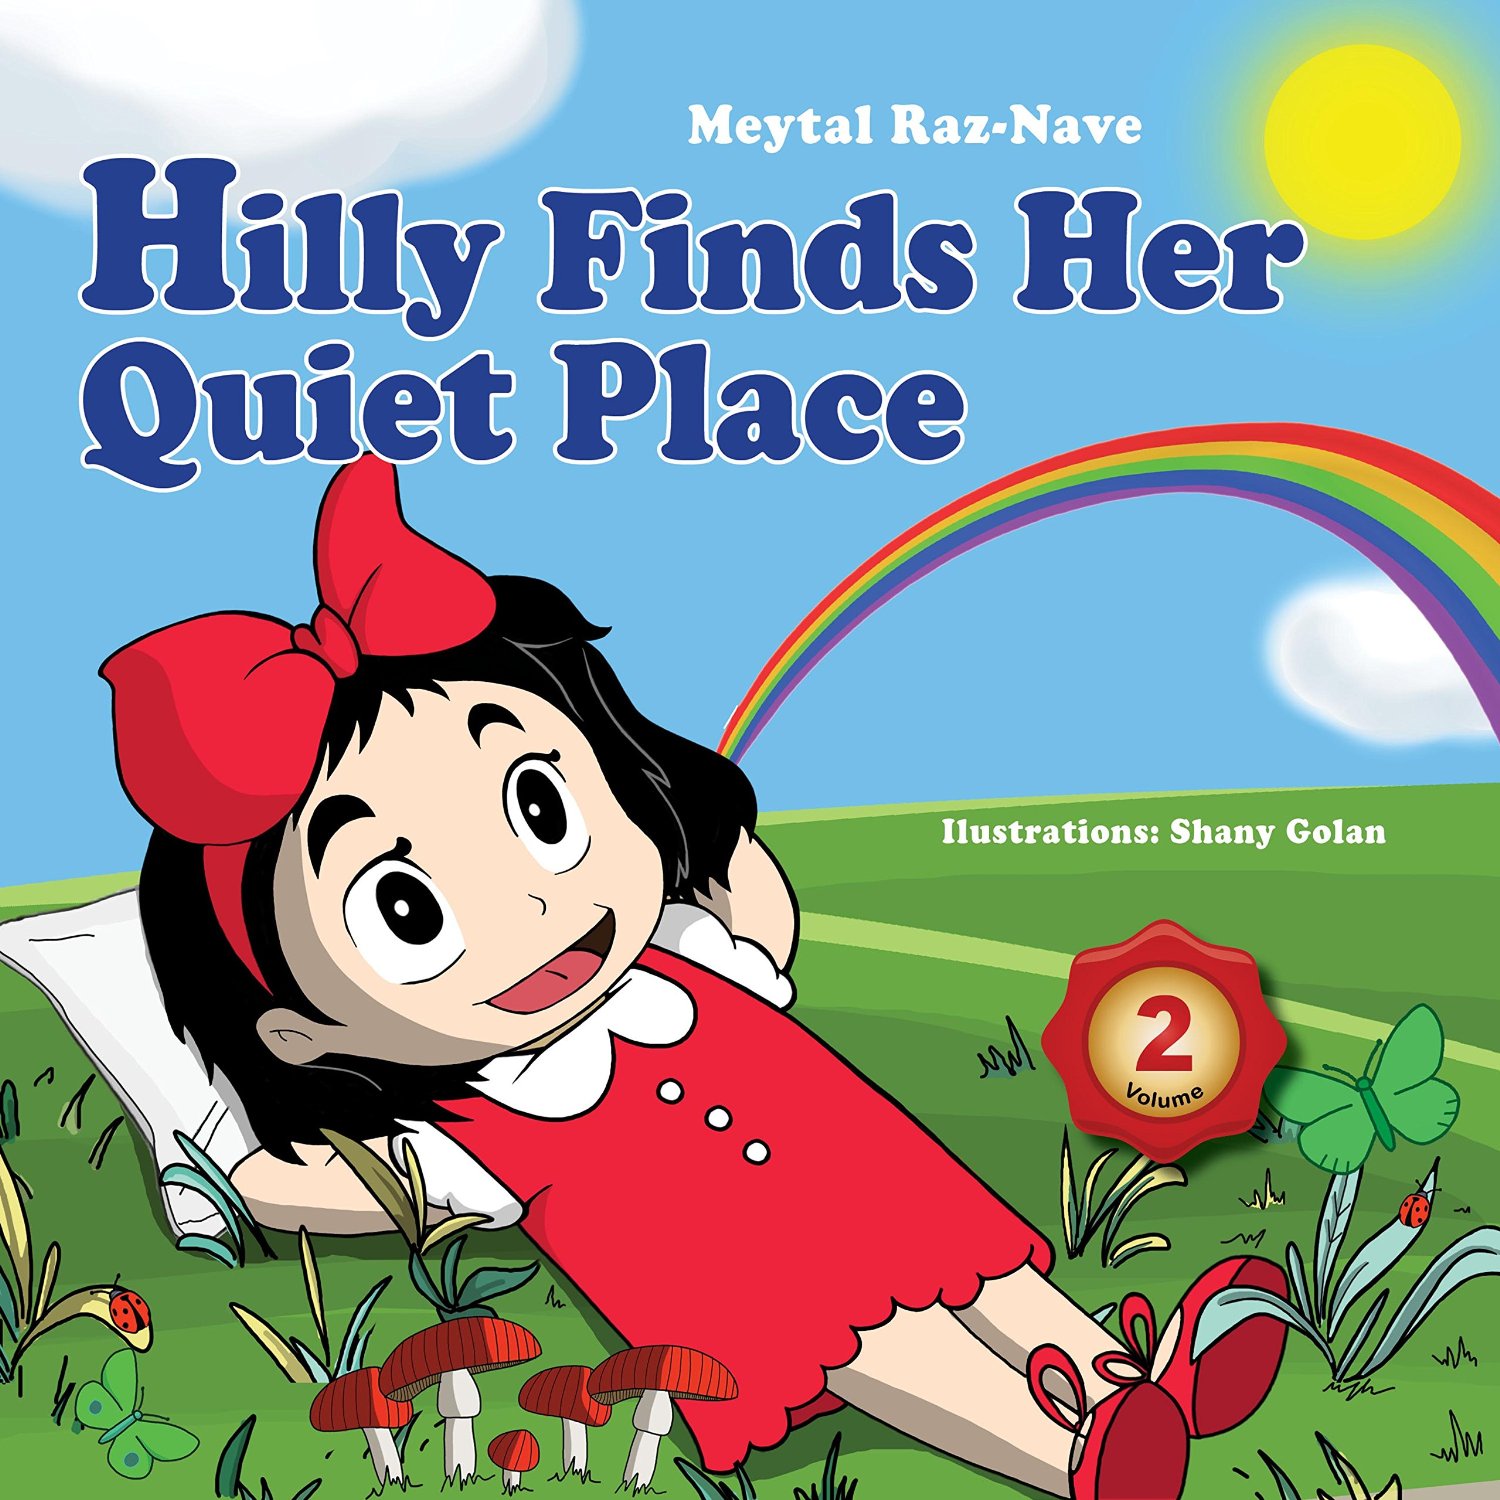 Hilly finds her quiet place by Meytal Raz-Nave